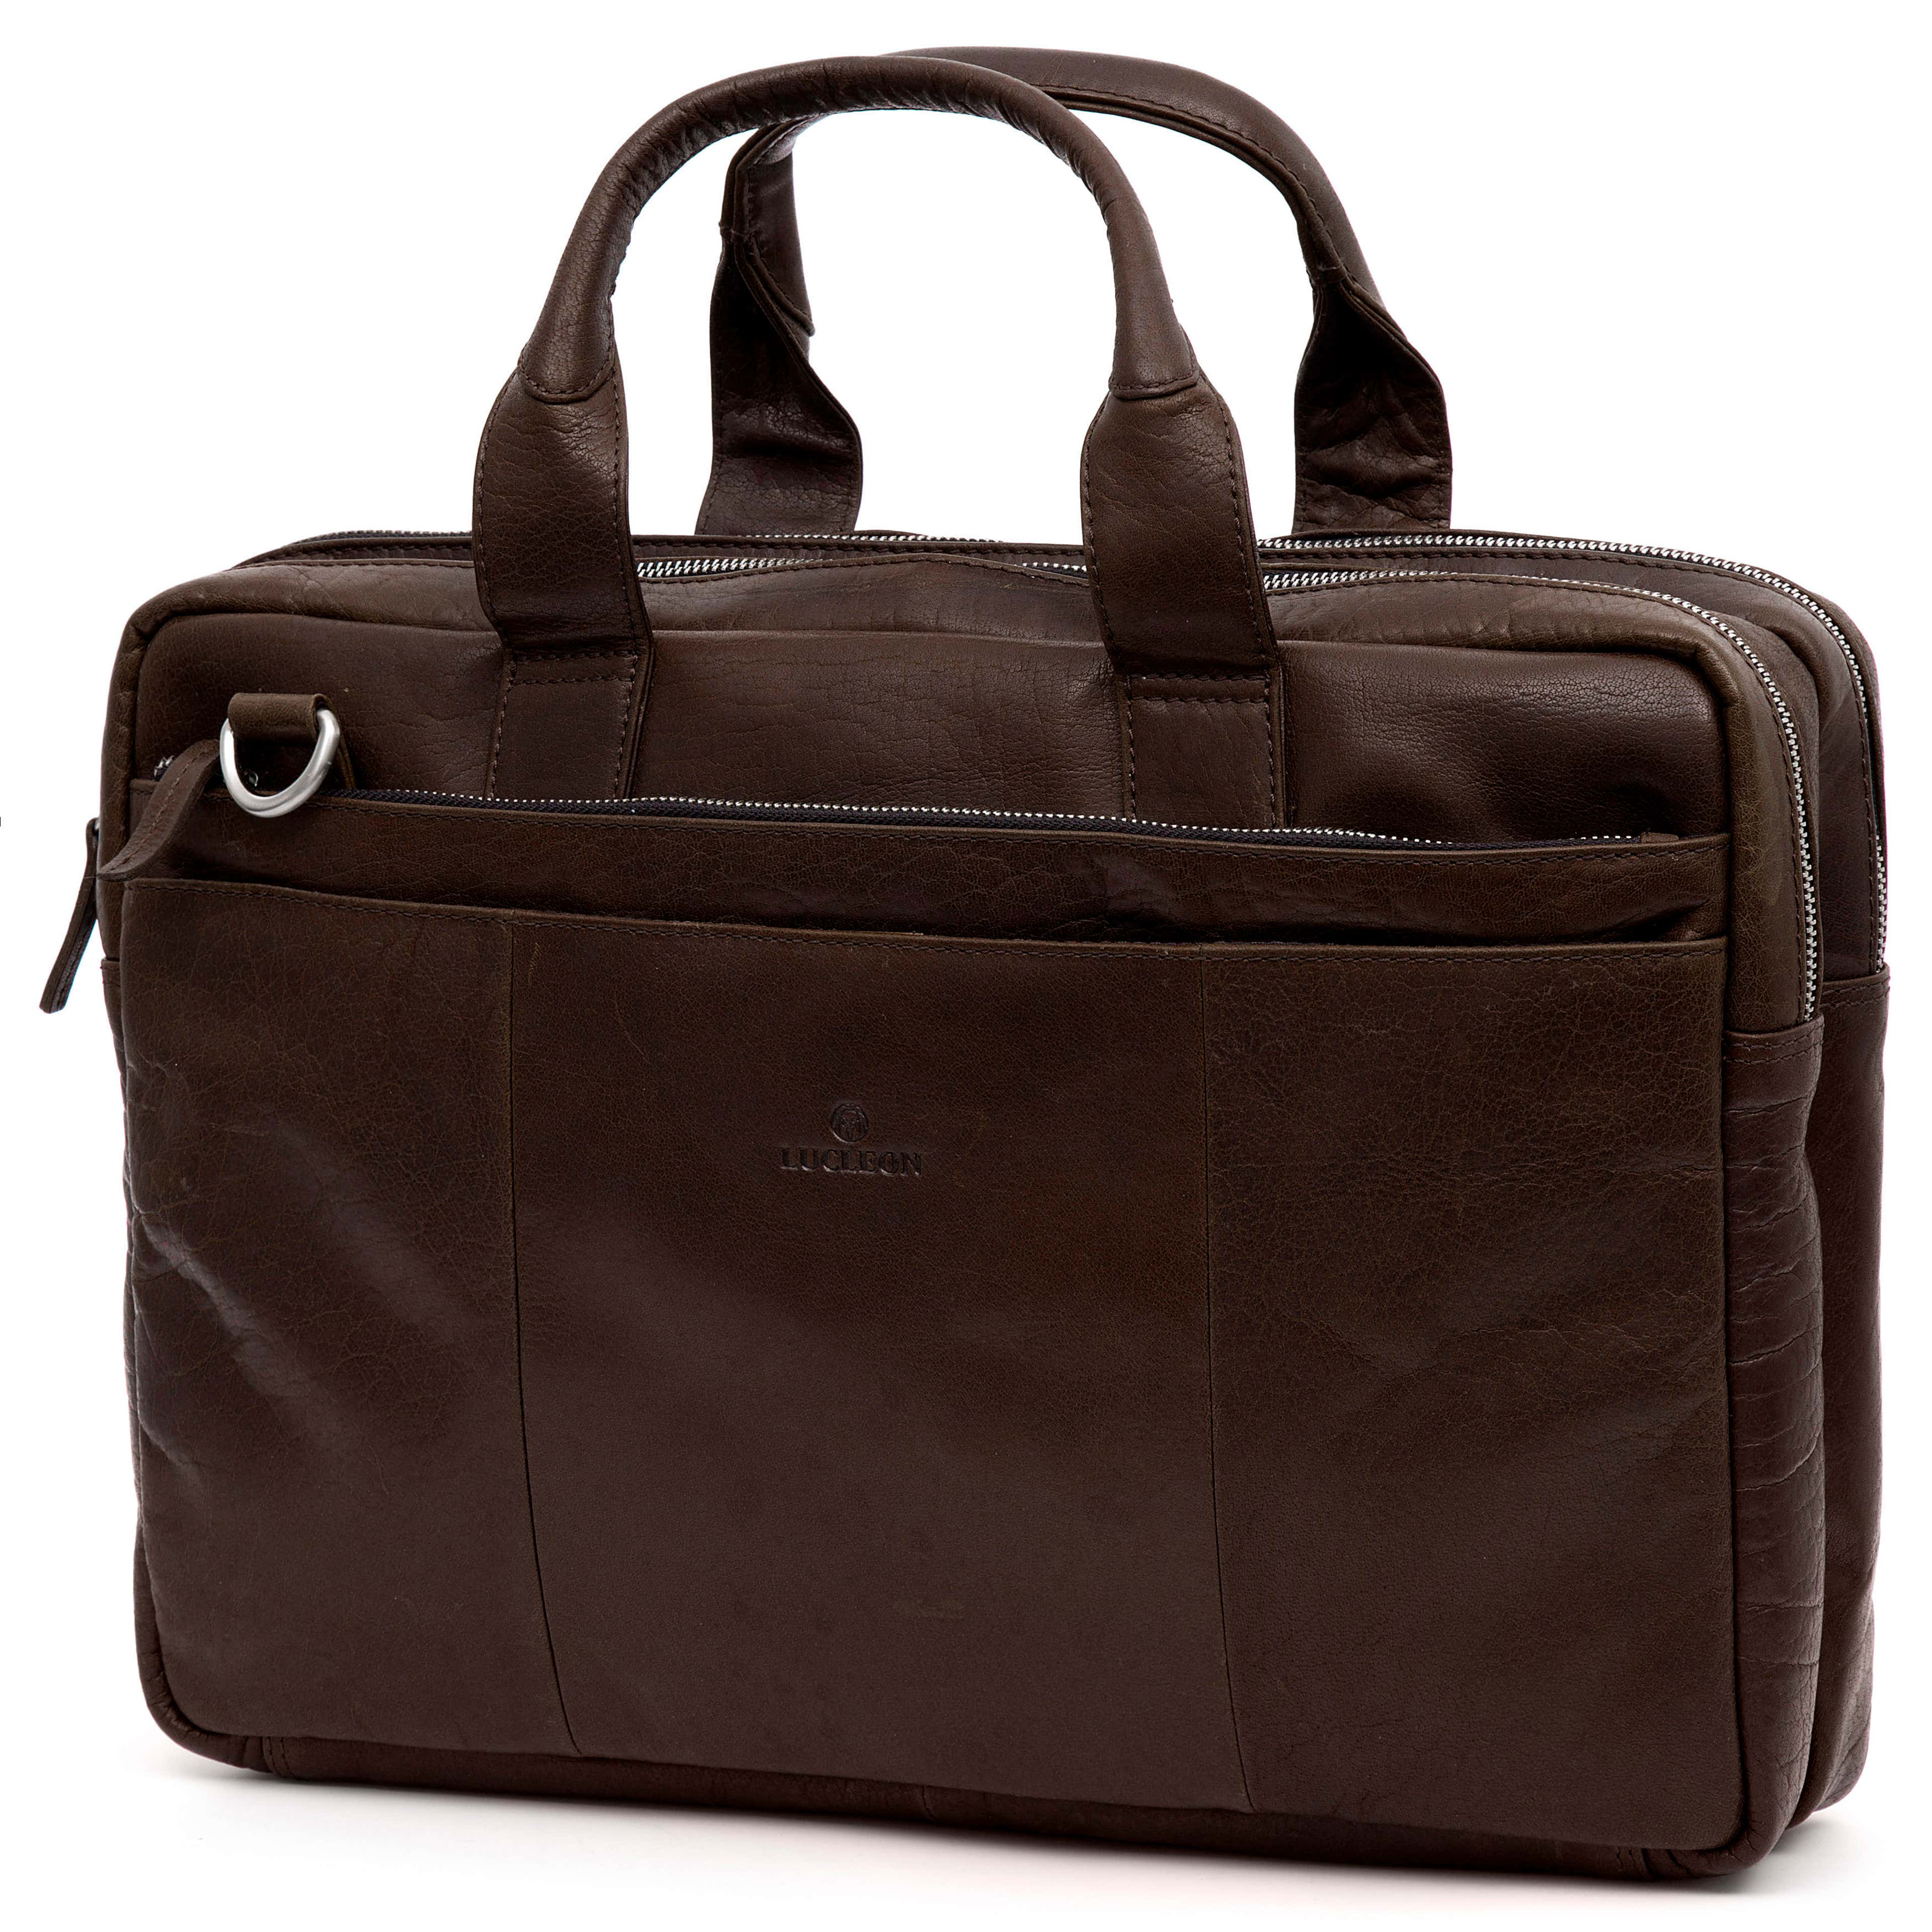 Montreal Brown Leather Laptop Bag